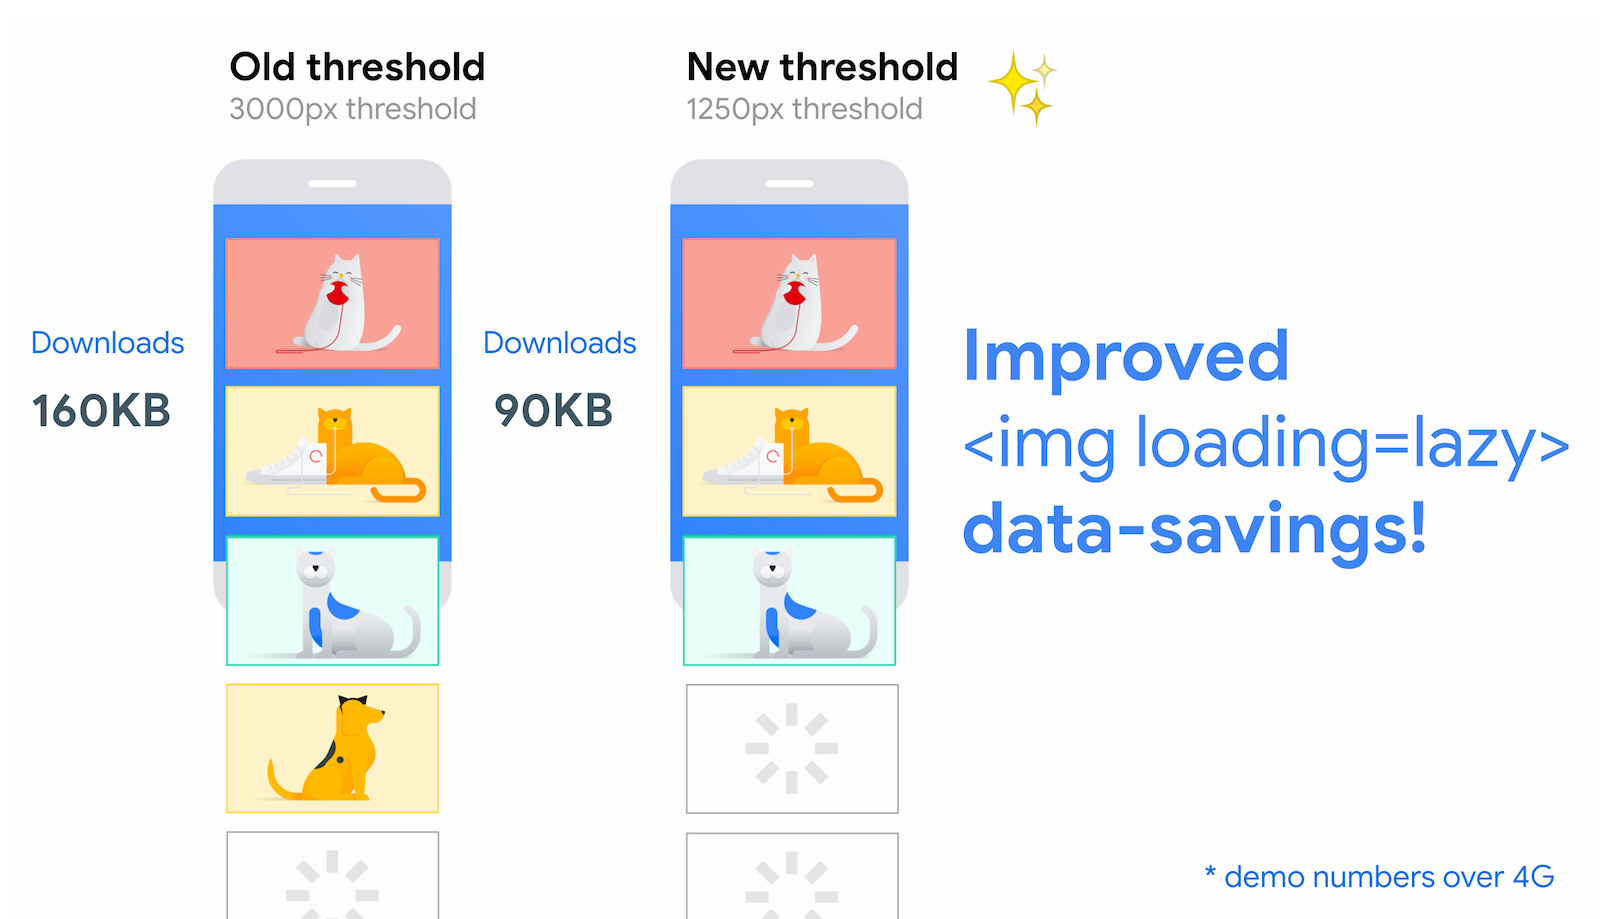 The new and improved thresholds for native image lazy-loading, reducing the distance-from-viewport thresholds for fast connections from 3000px down to 1250px